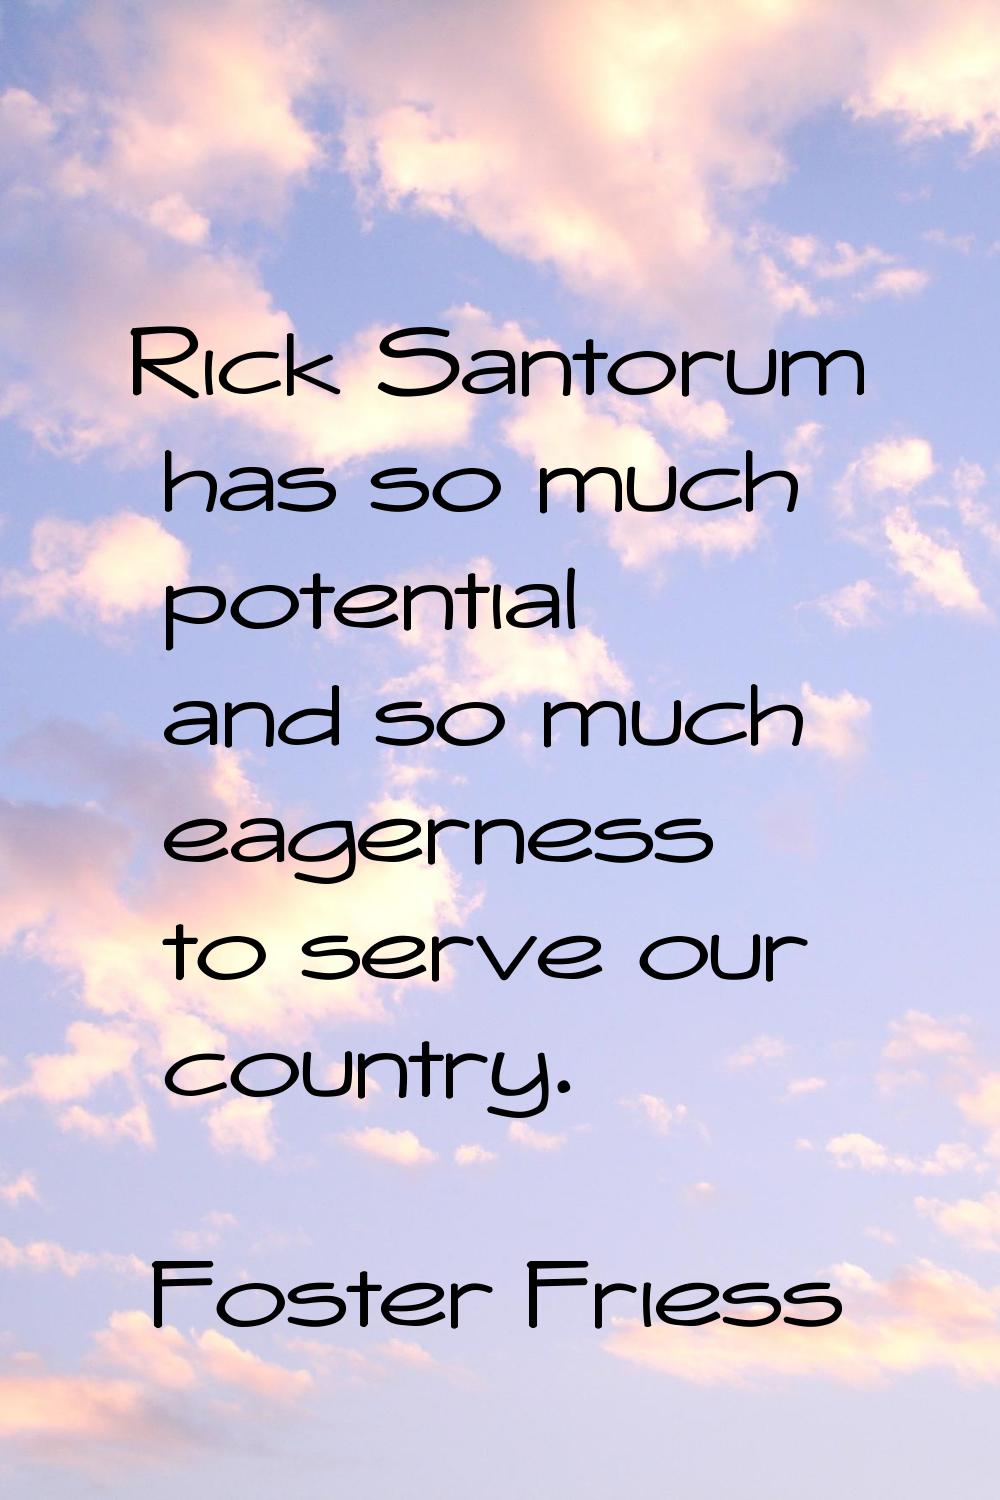 Rick Santorum has so much potential and so much eagerness to serve our country.